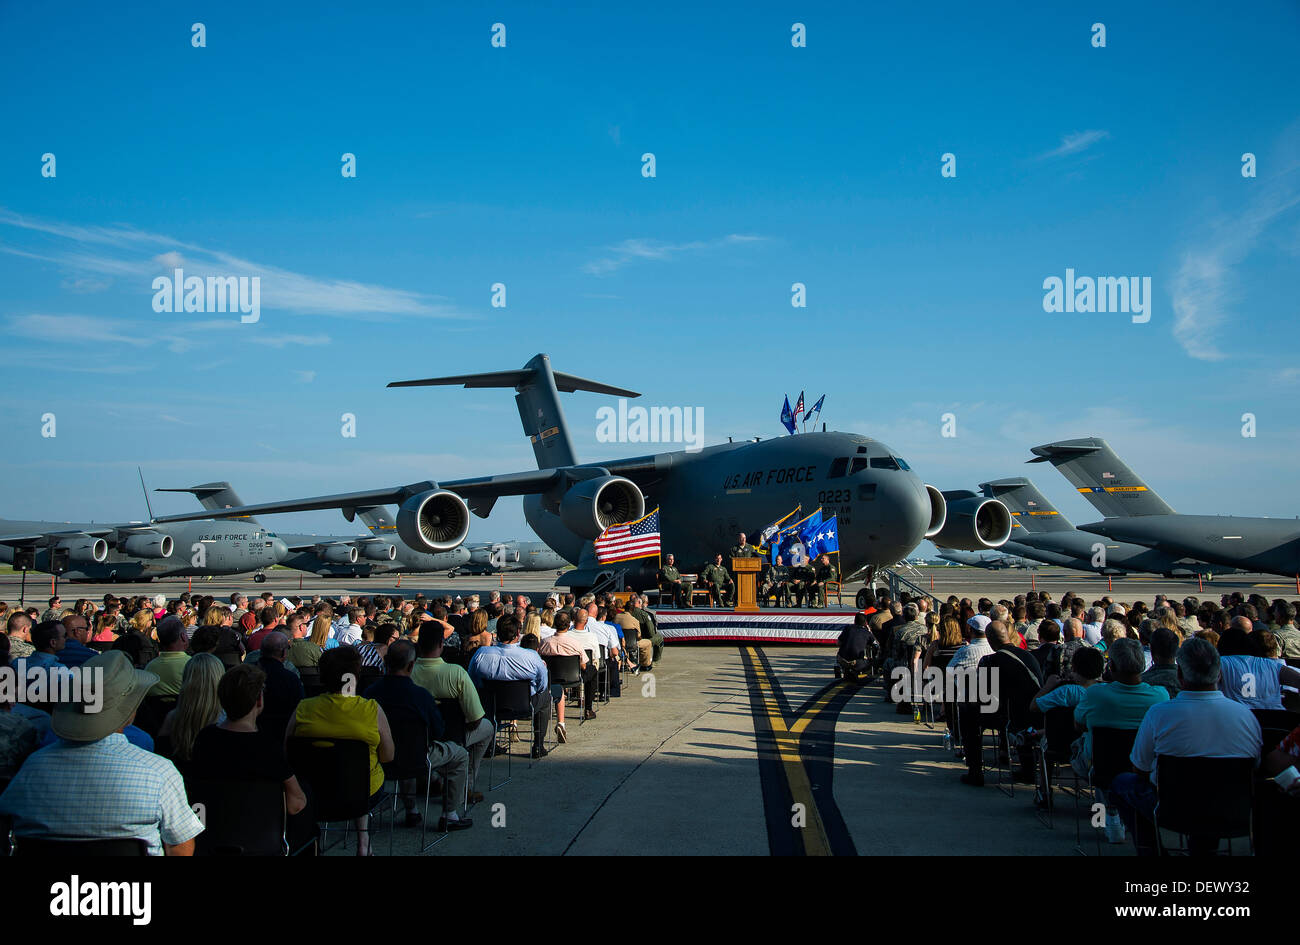 Members of Joint Base Charleston, Boeing, the local community and other distinguished visitors gather for a ceremony held to commemorate the delivery of the final U.S. Air Force C-17 Globemaster III, P-223, Sept. 12, 2013, on the flight line at Joint Base Stock Photo